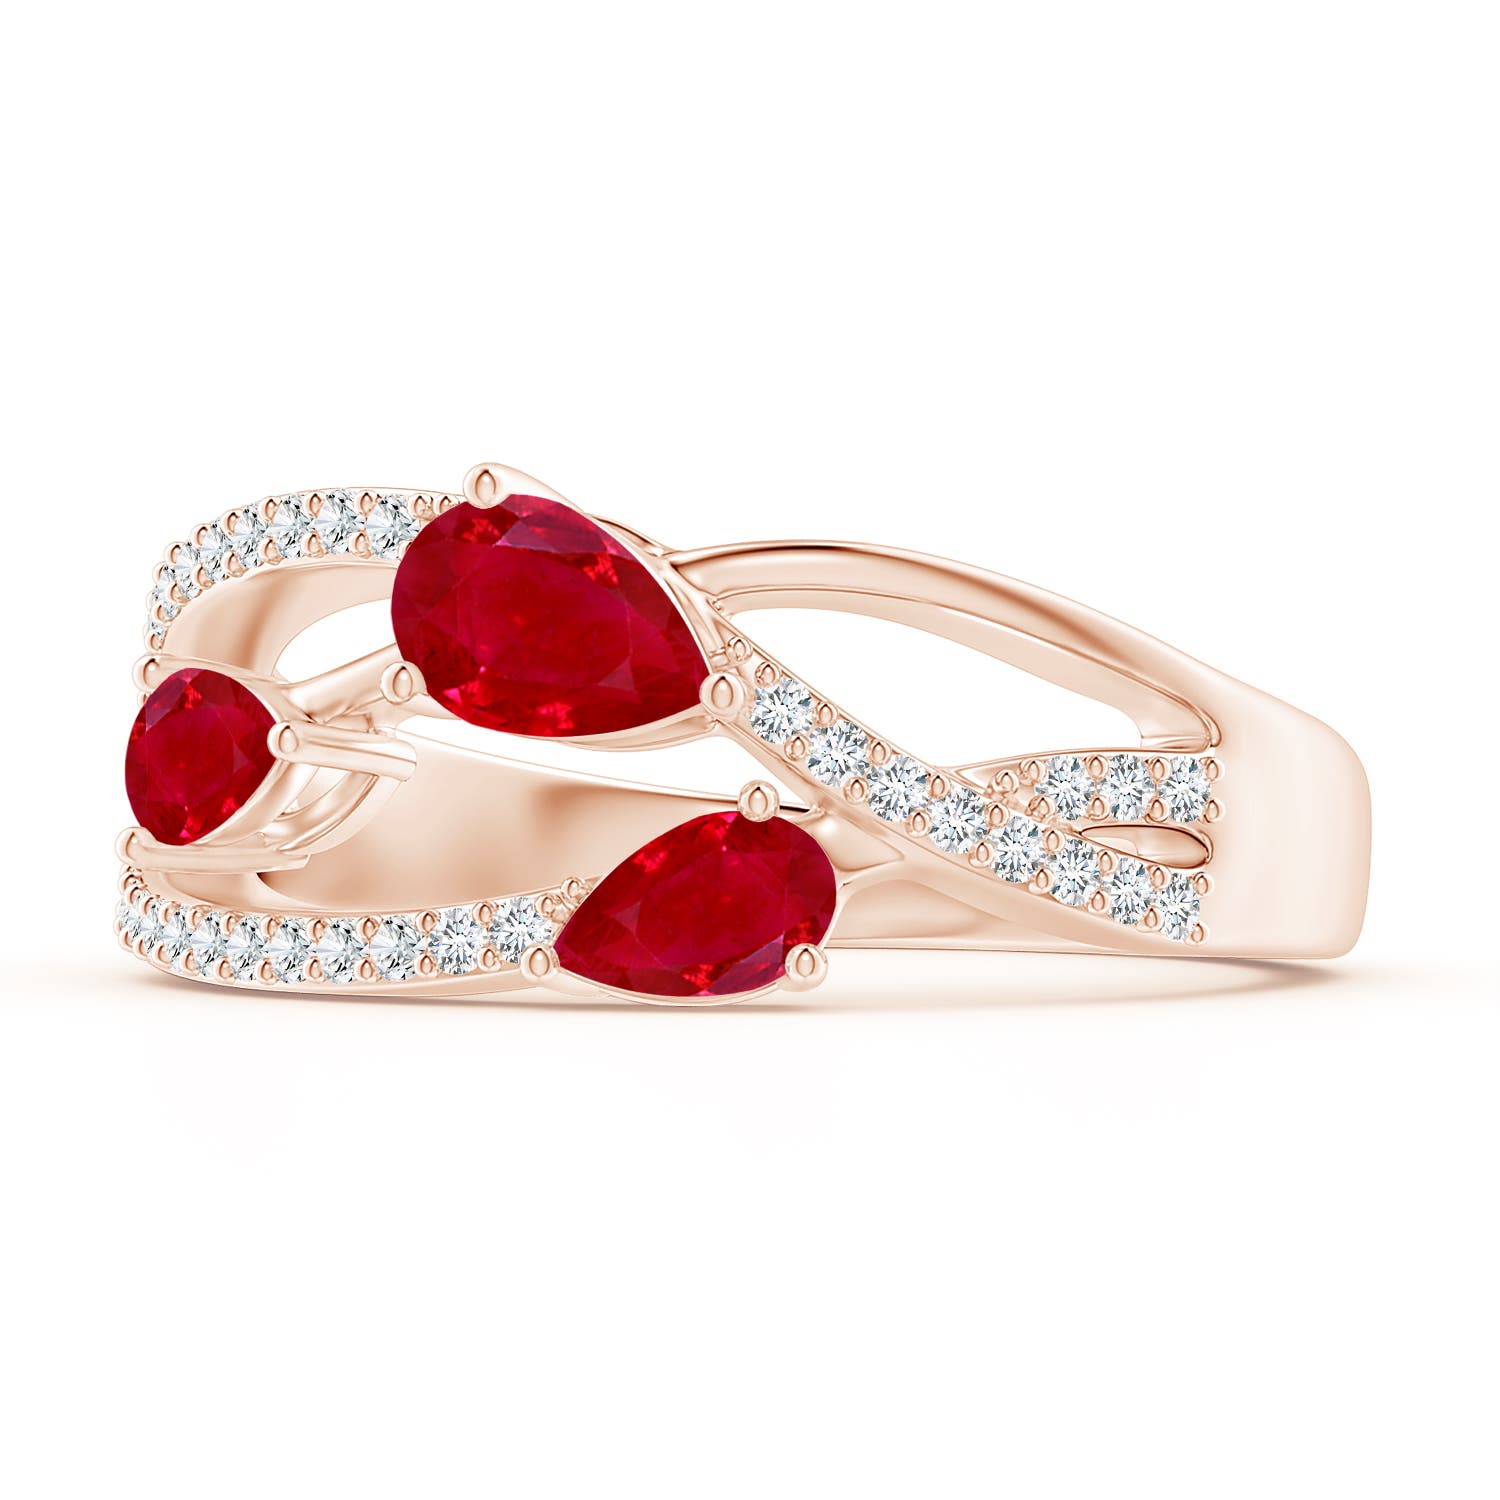 AAA - Ruby / 1.03 CT / 14 KT Rose Gold